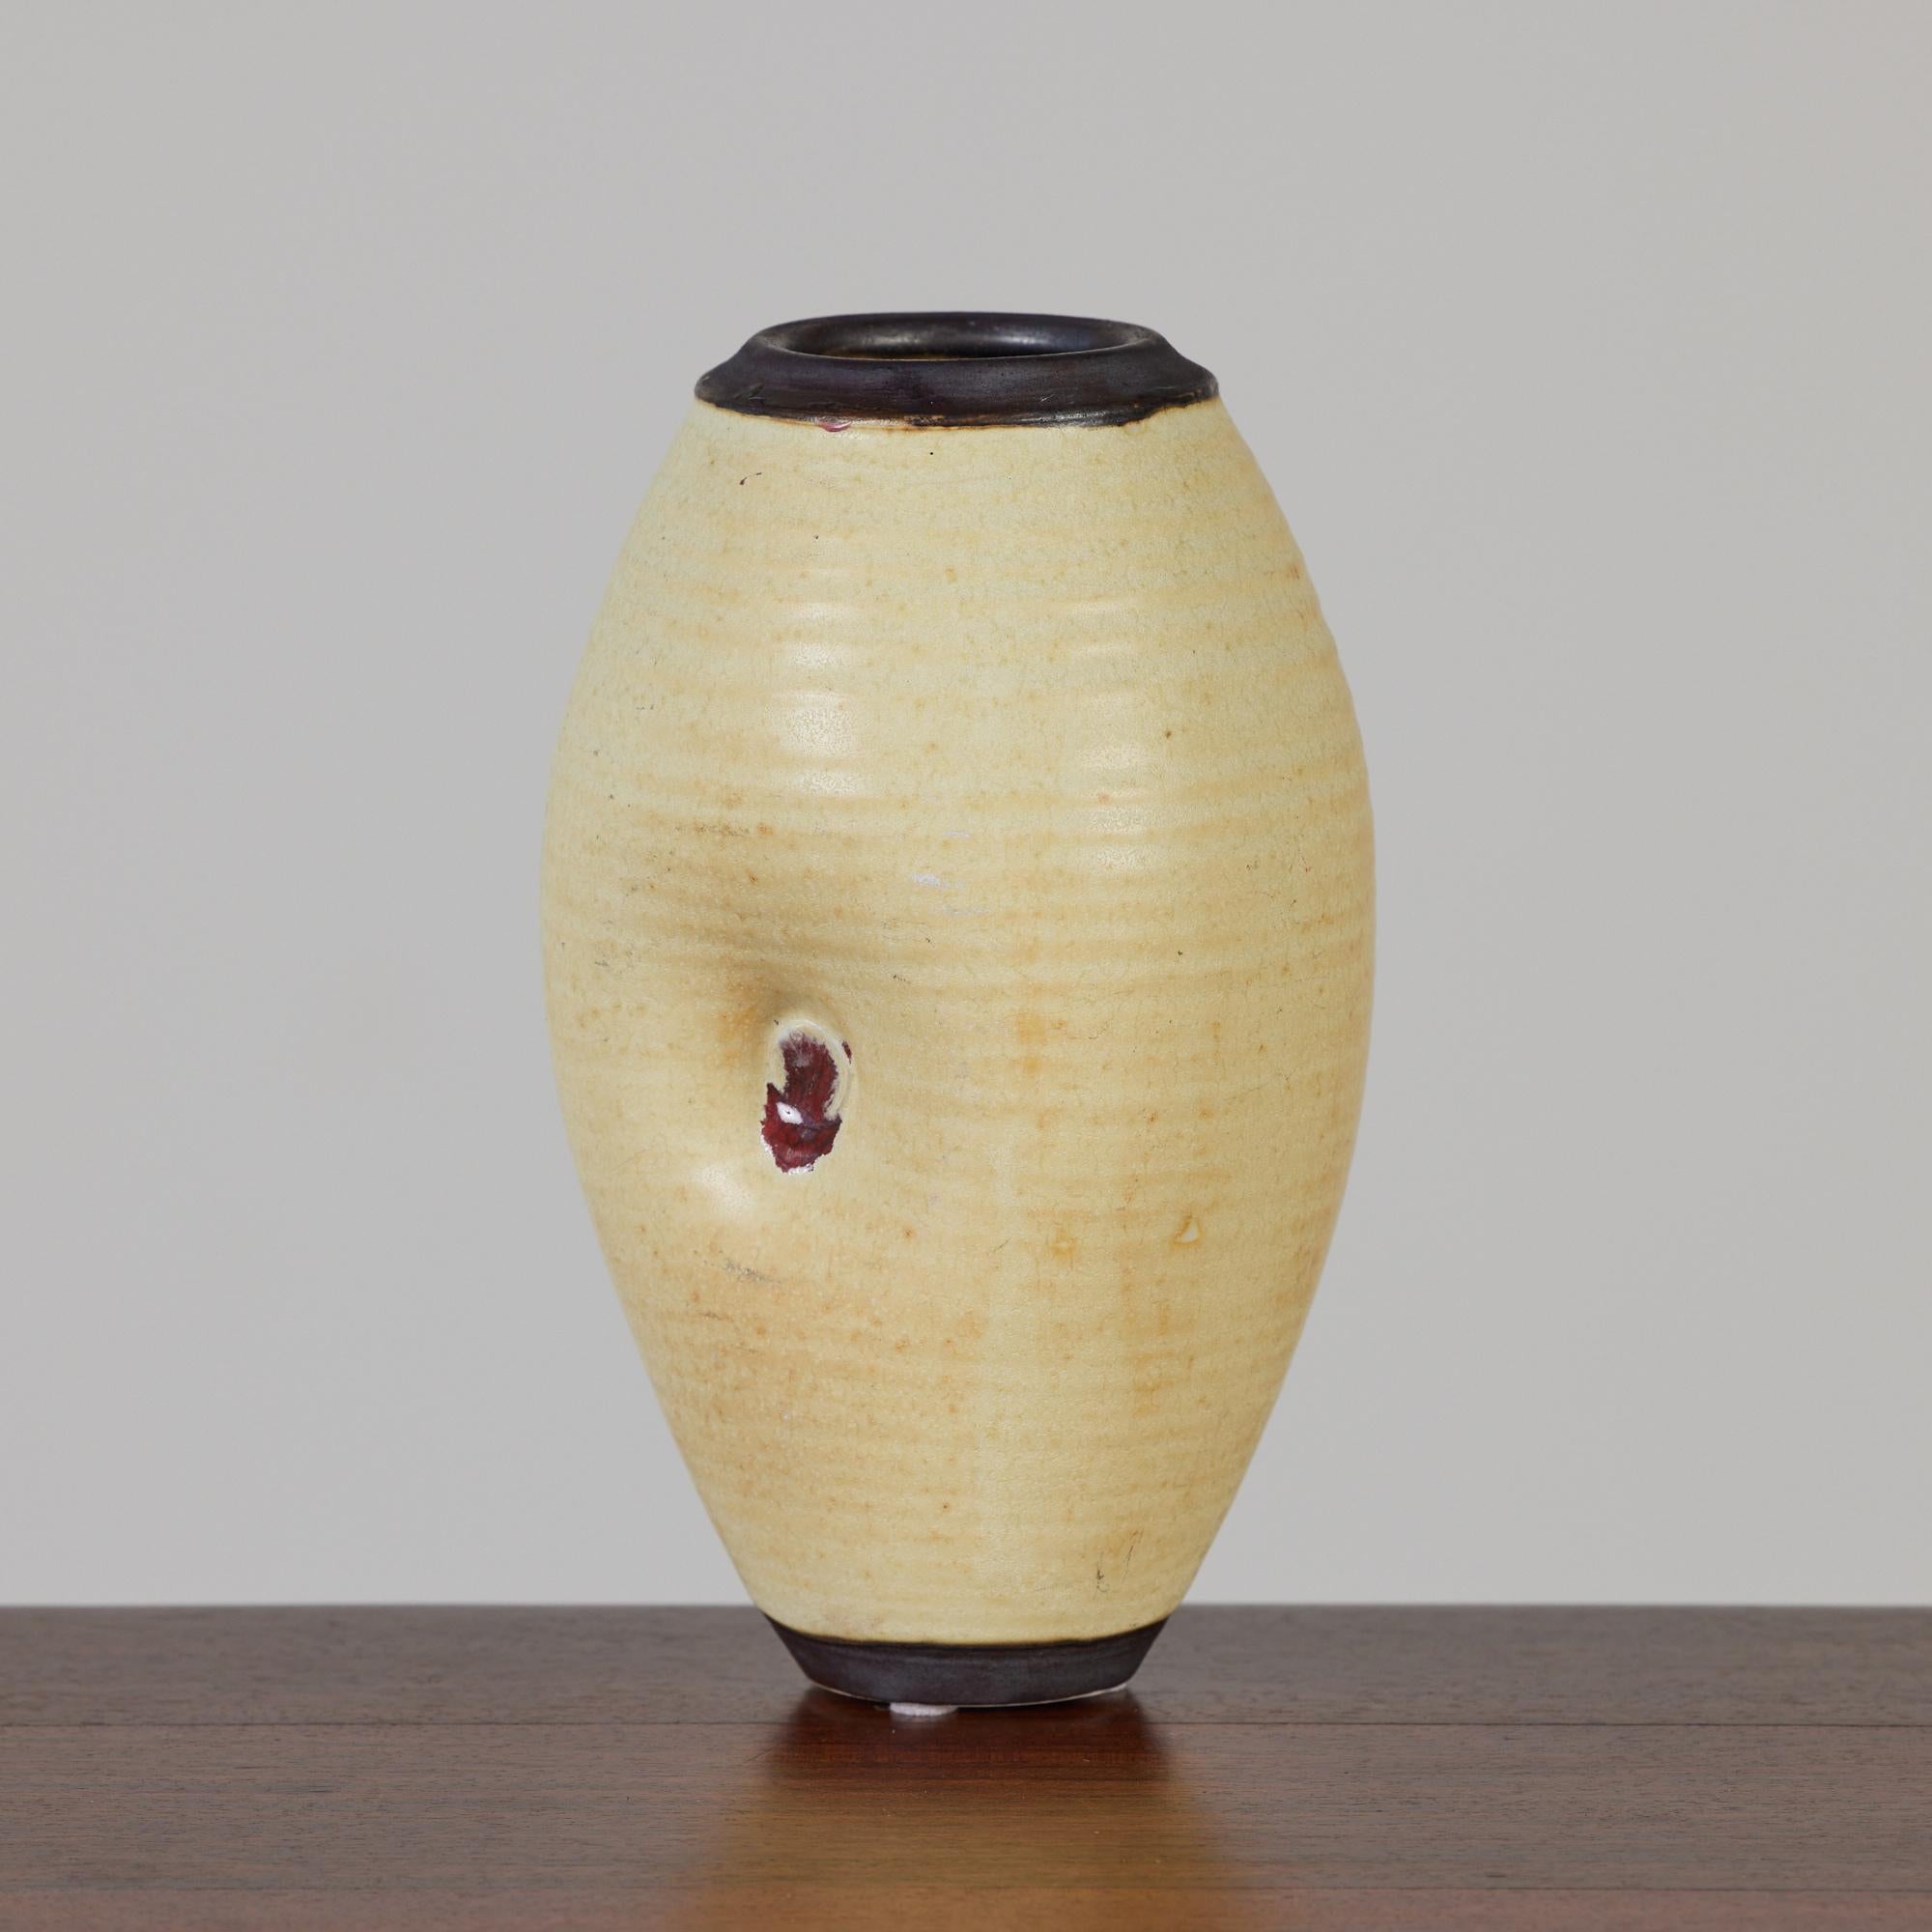 A small studio pottery vessel by significant 20th century ceramicist Otto Heino. This piece features the buttery yellow glaze Heino perfected after his wife’s death, a continuation of her long-running project to reproduce a lost glaze recipe from